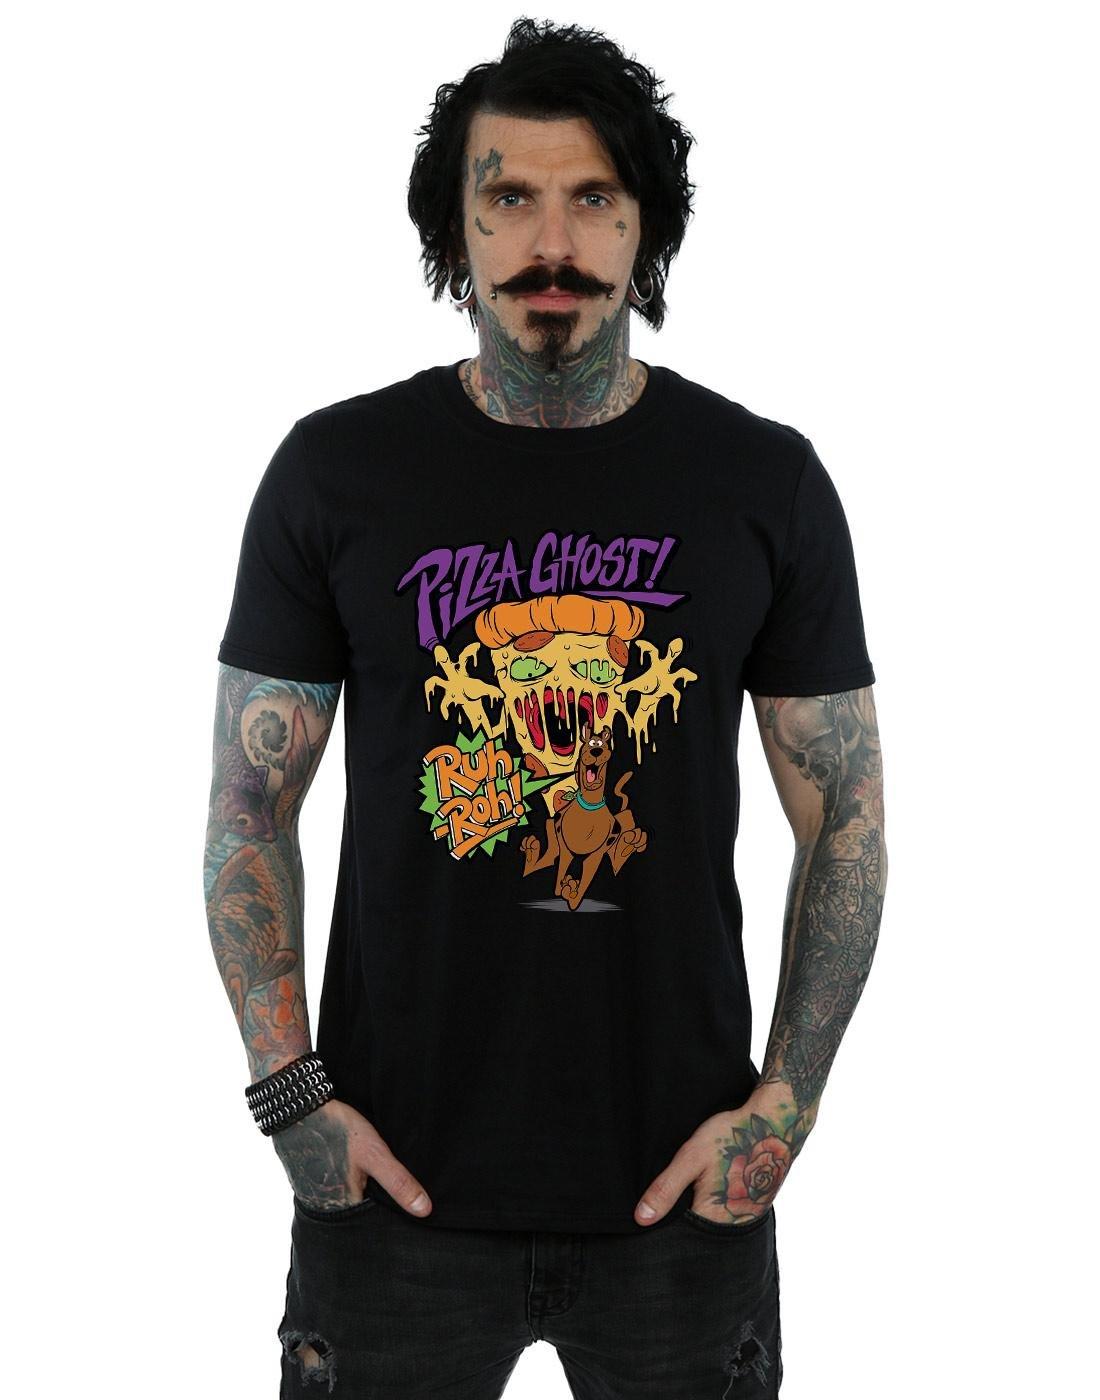 SCOOBY DOO  Pizza Ghost TShirt 